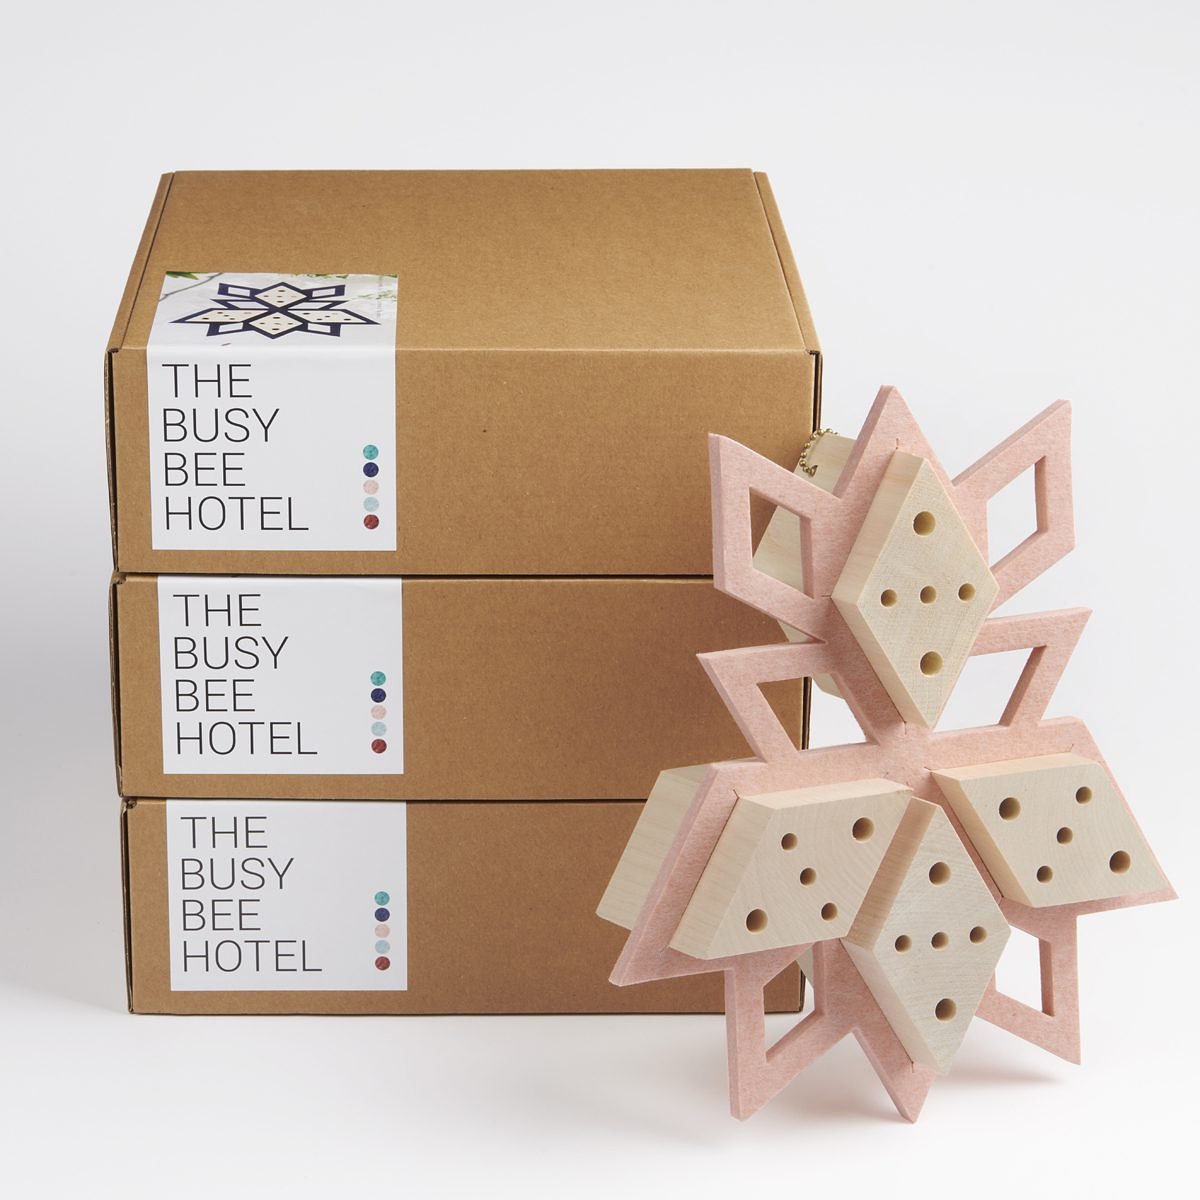 The busy bee hotel - Soft Pink